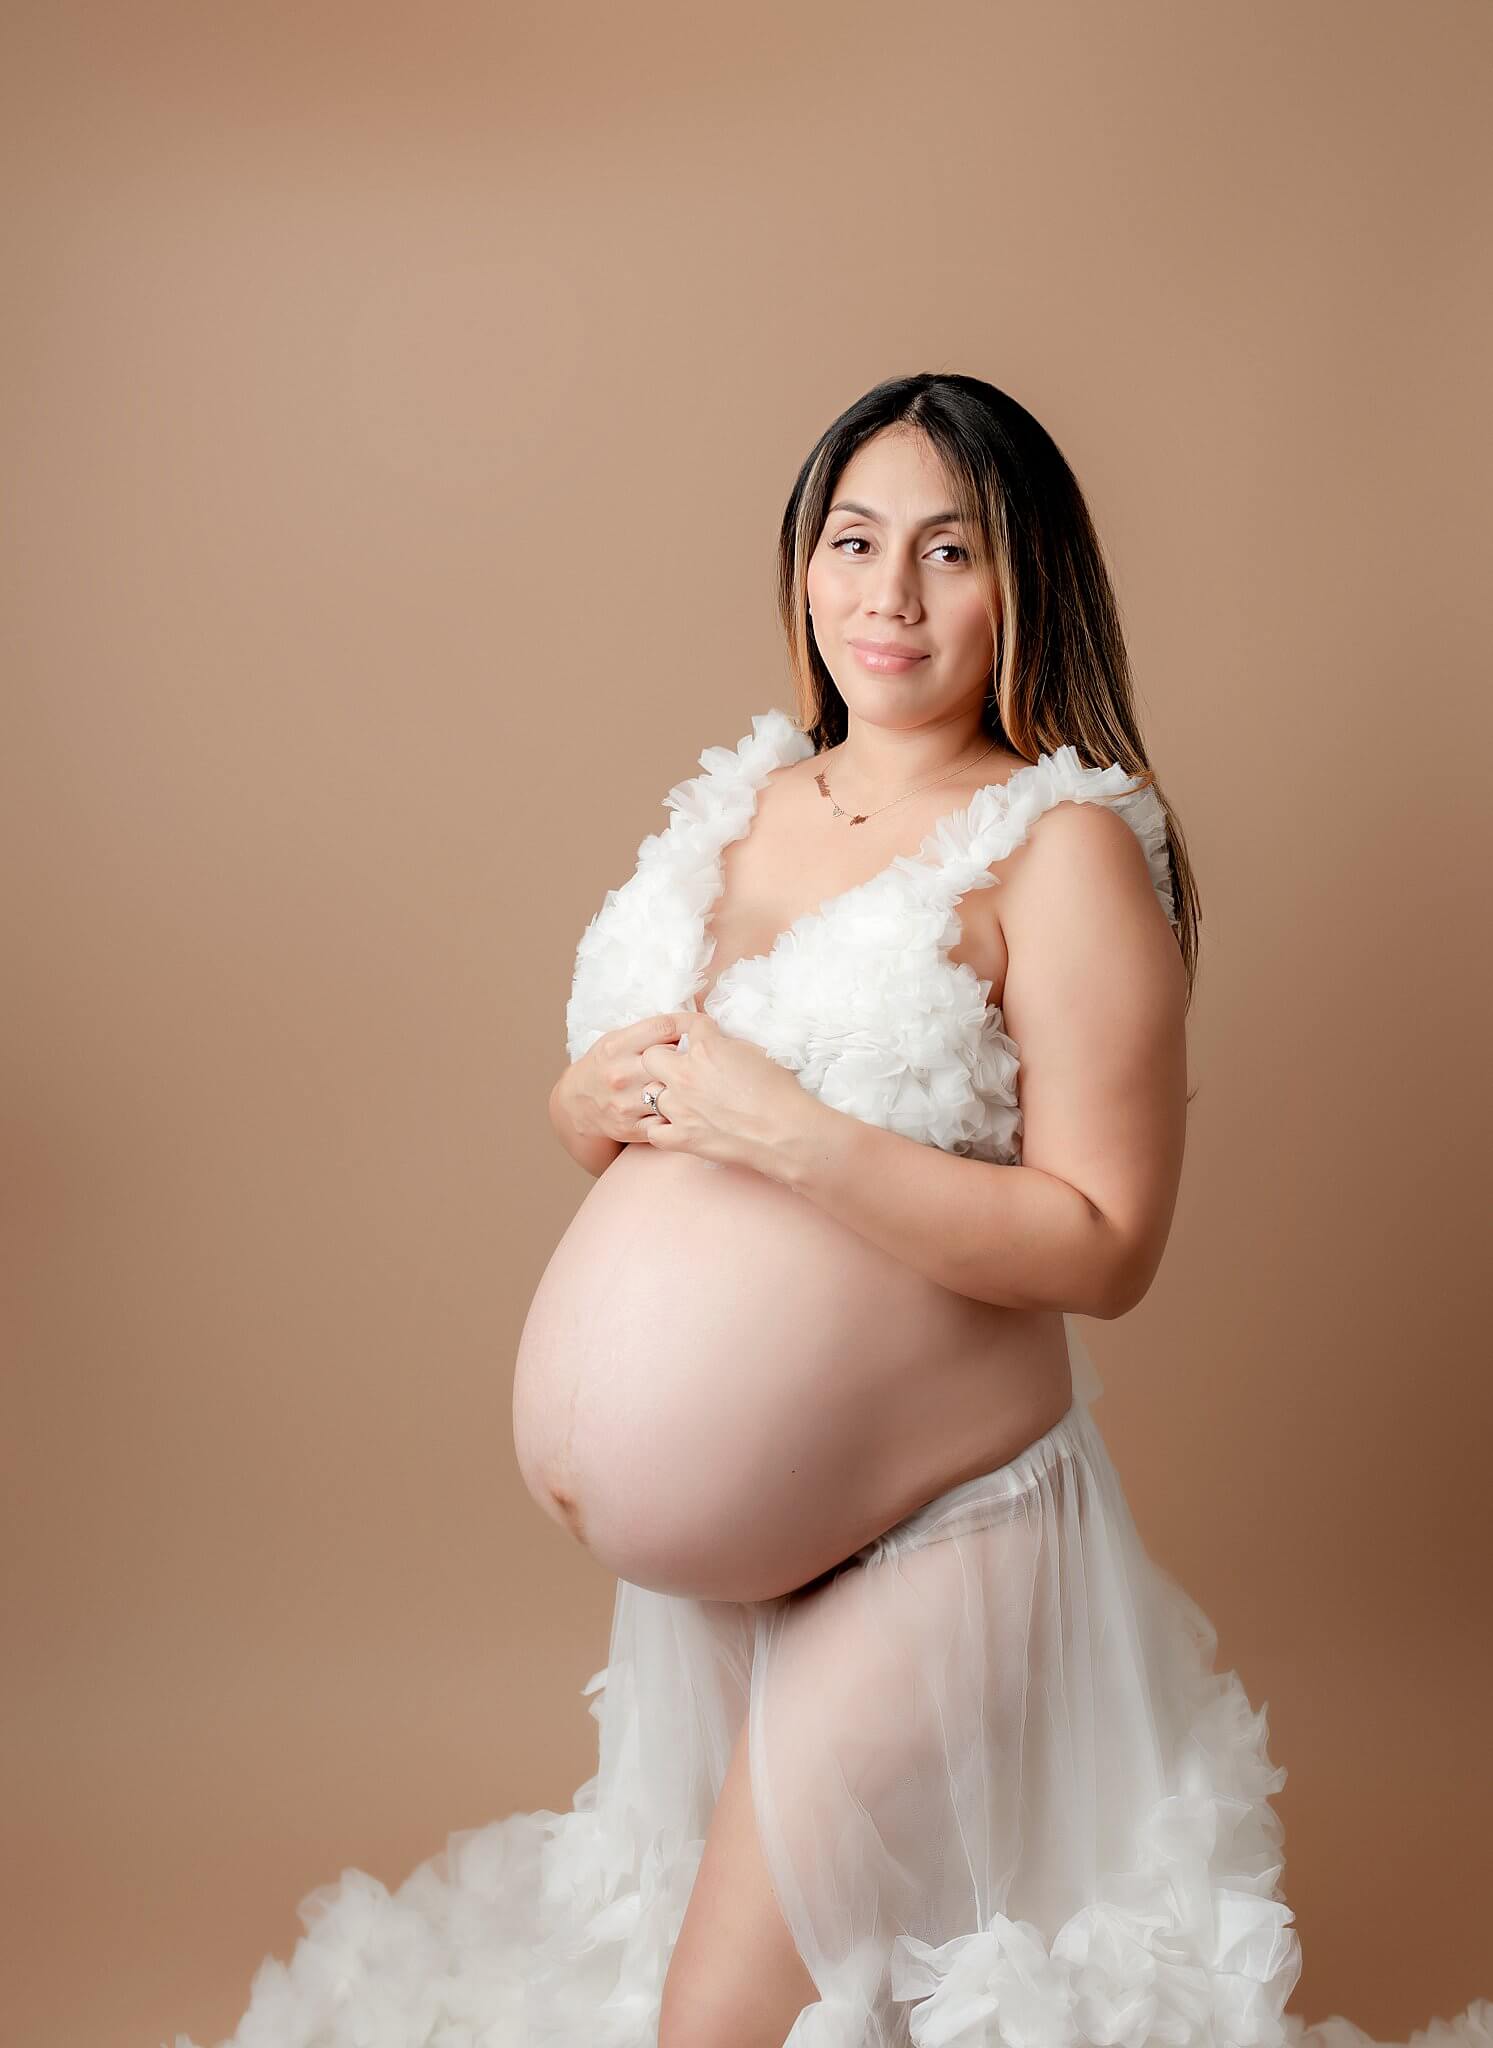 Maternity photos with mom wearing white two piece outfit.